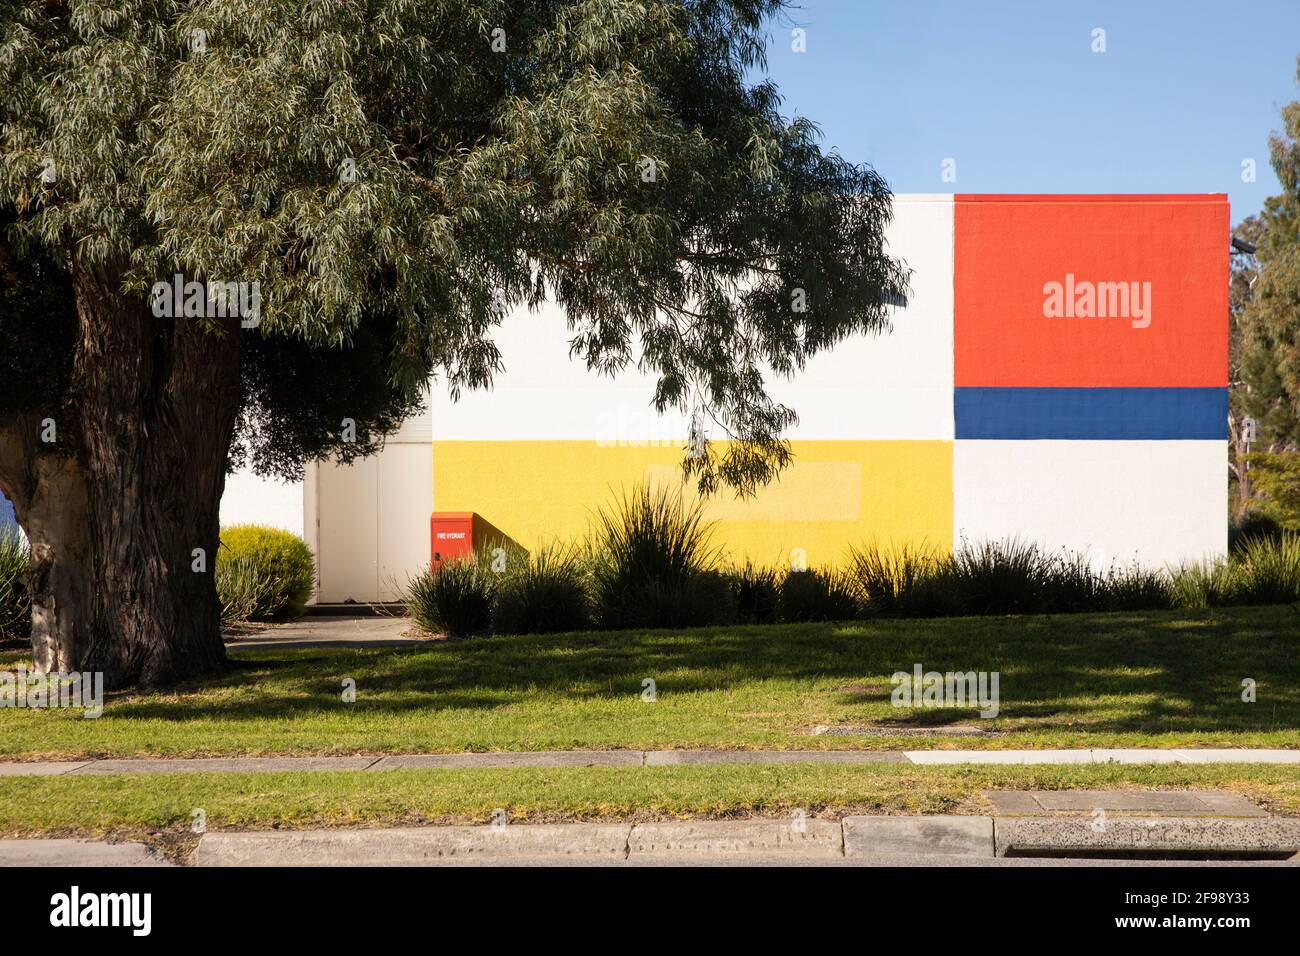 Red blue yellow composition Piet Mondrian architecture reference. Stock Photo